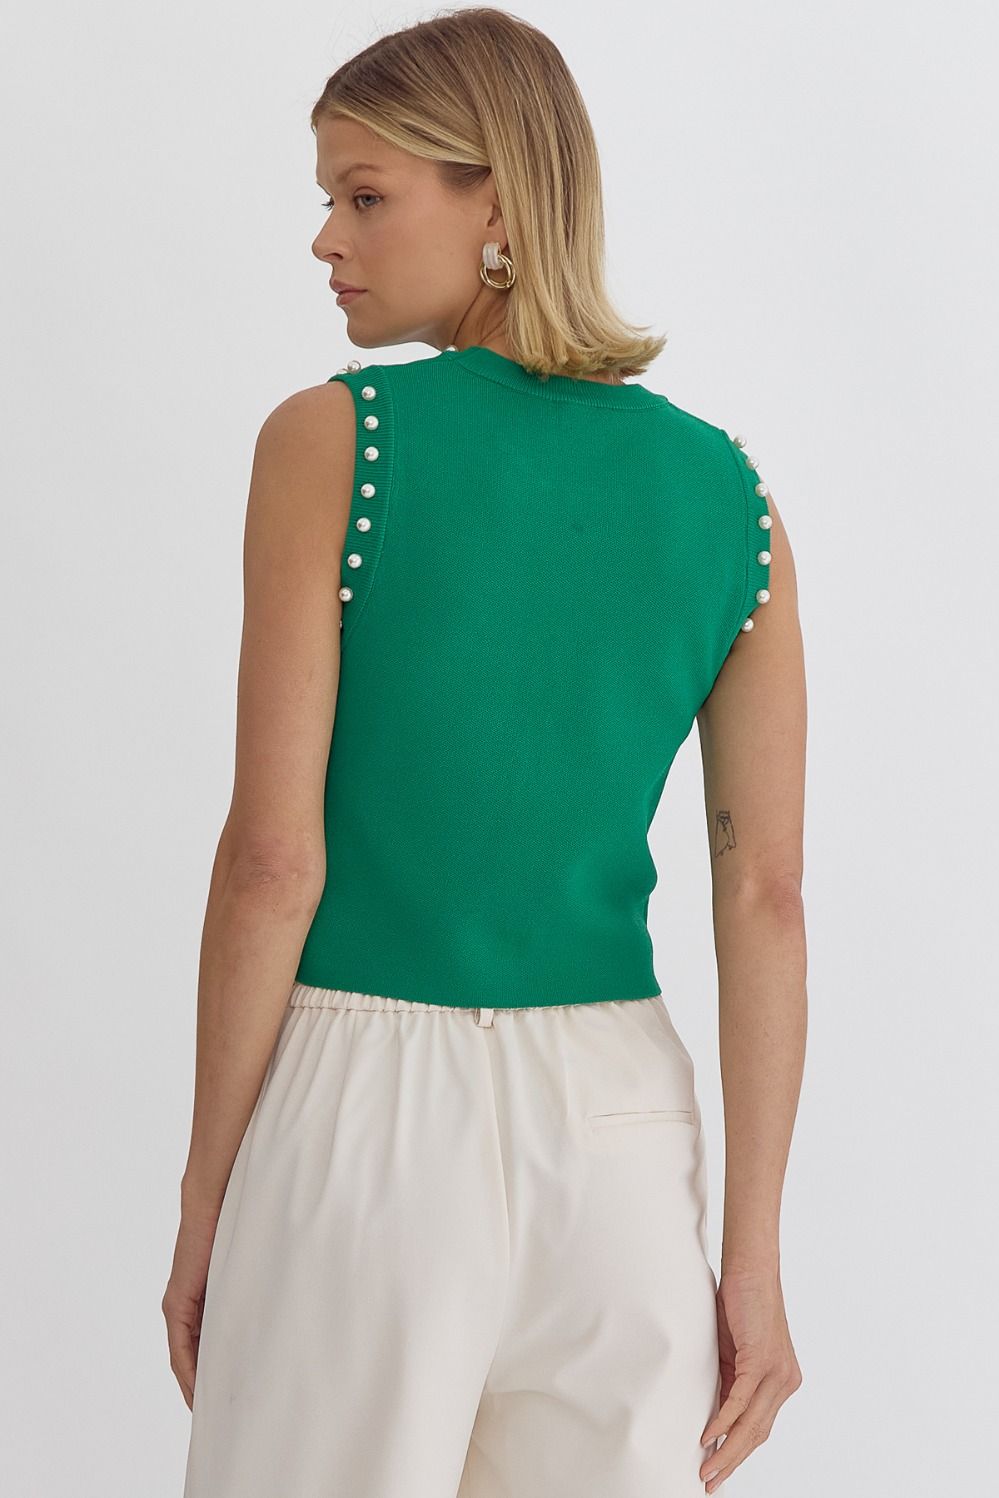 Entro | Green Pearl Sleeveless Top | Sweetest Stitch Shop Tops 